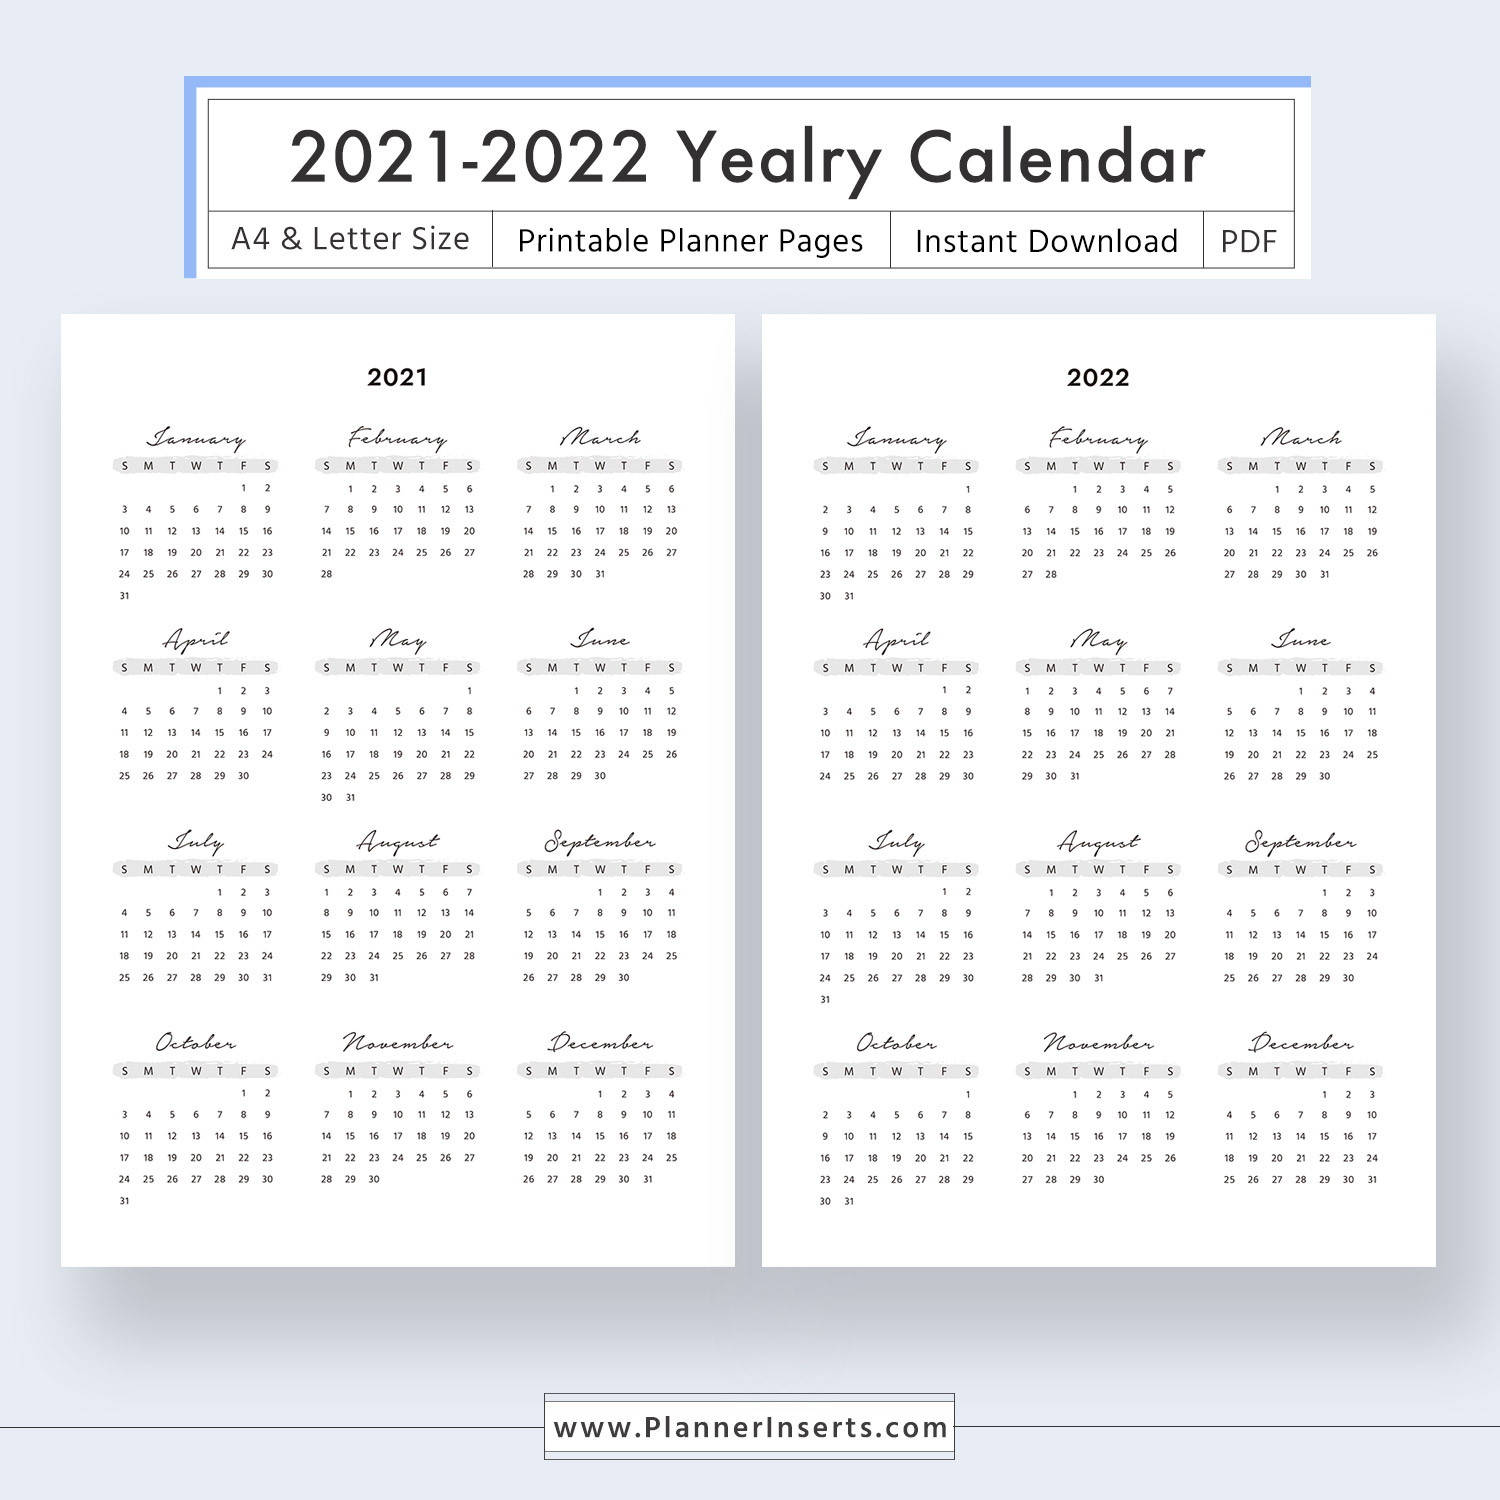 2021-2022 Yearly Calendar For Unlimited Instant Download